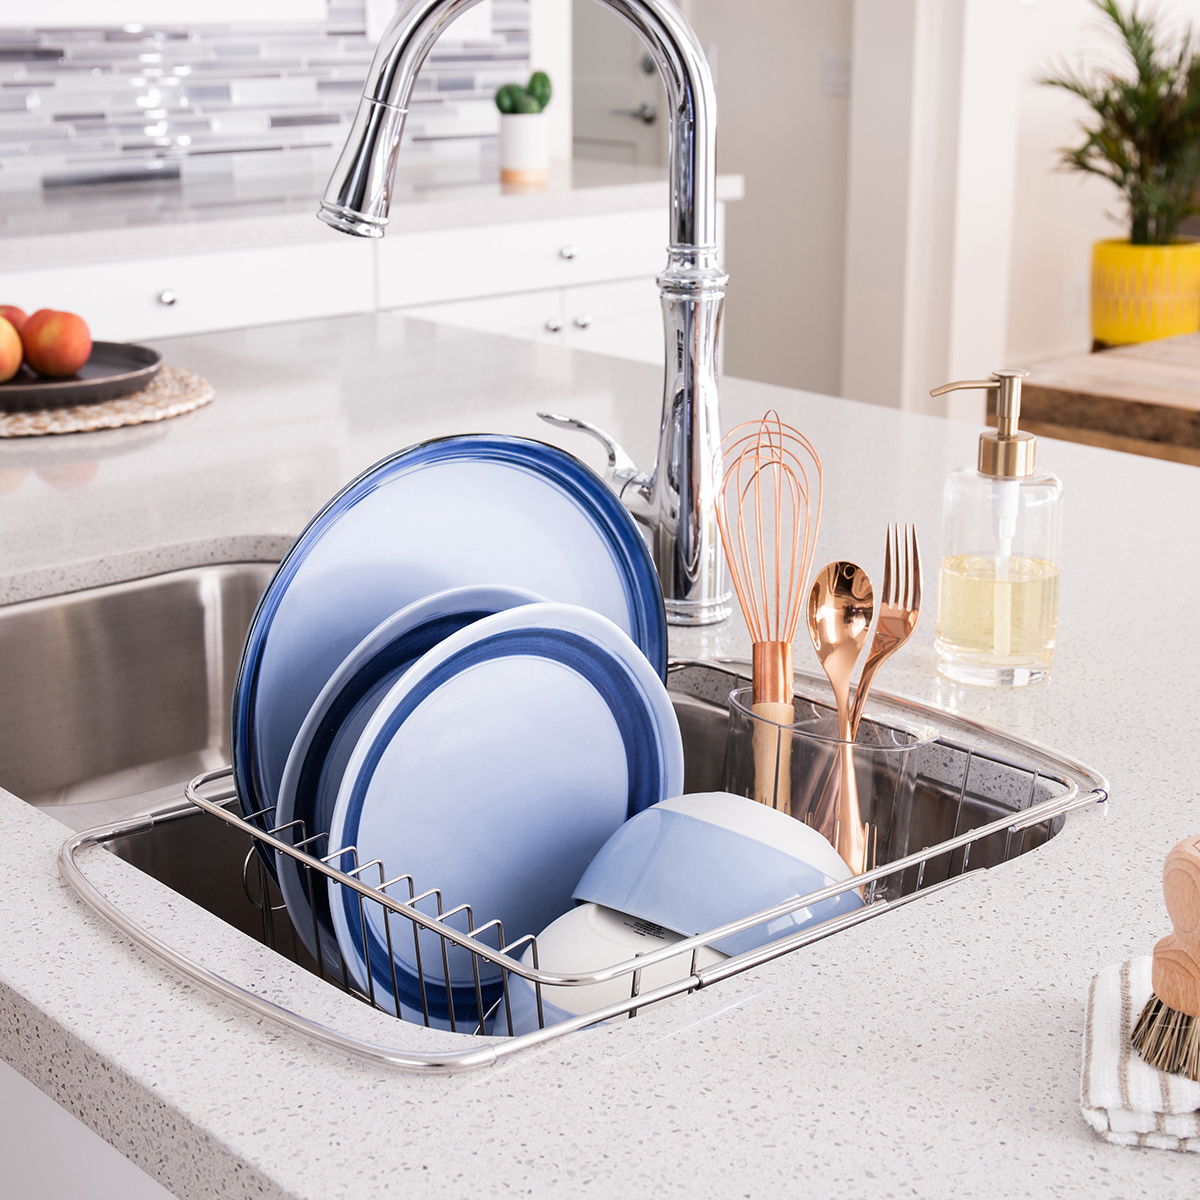 https://www.containerstore.com/catalogimages/368793/10011443-In-Sink-Dish-Drainer-VEN.jpg